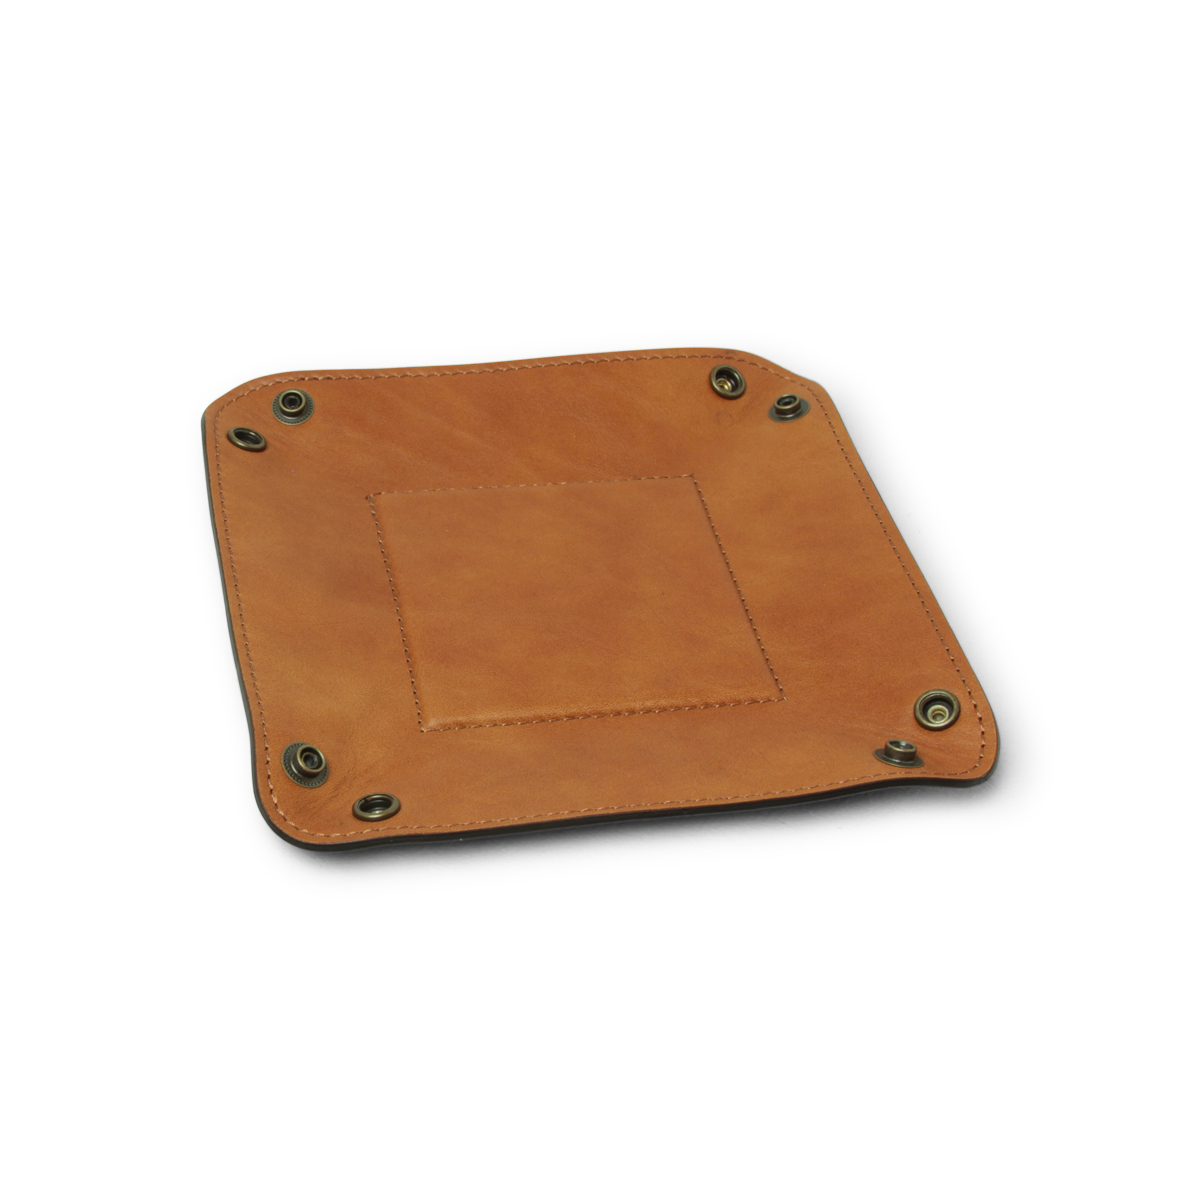 Leather valet tray - colonial|755589CO|Old Angler Firenze